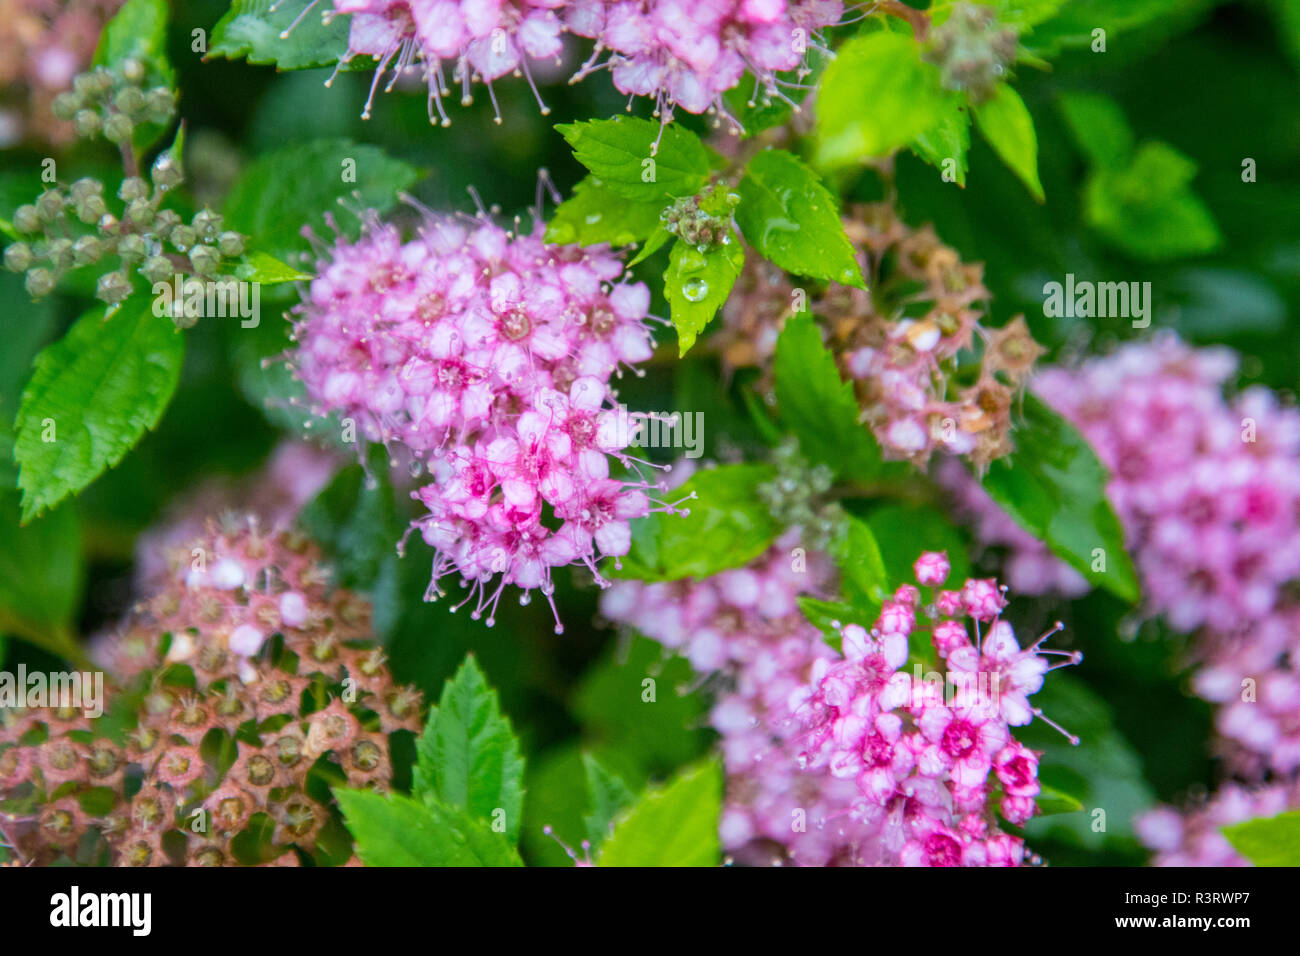 Flowering plant found in Hordaland province, in the town of Bergen. Stock Photo